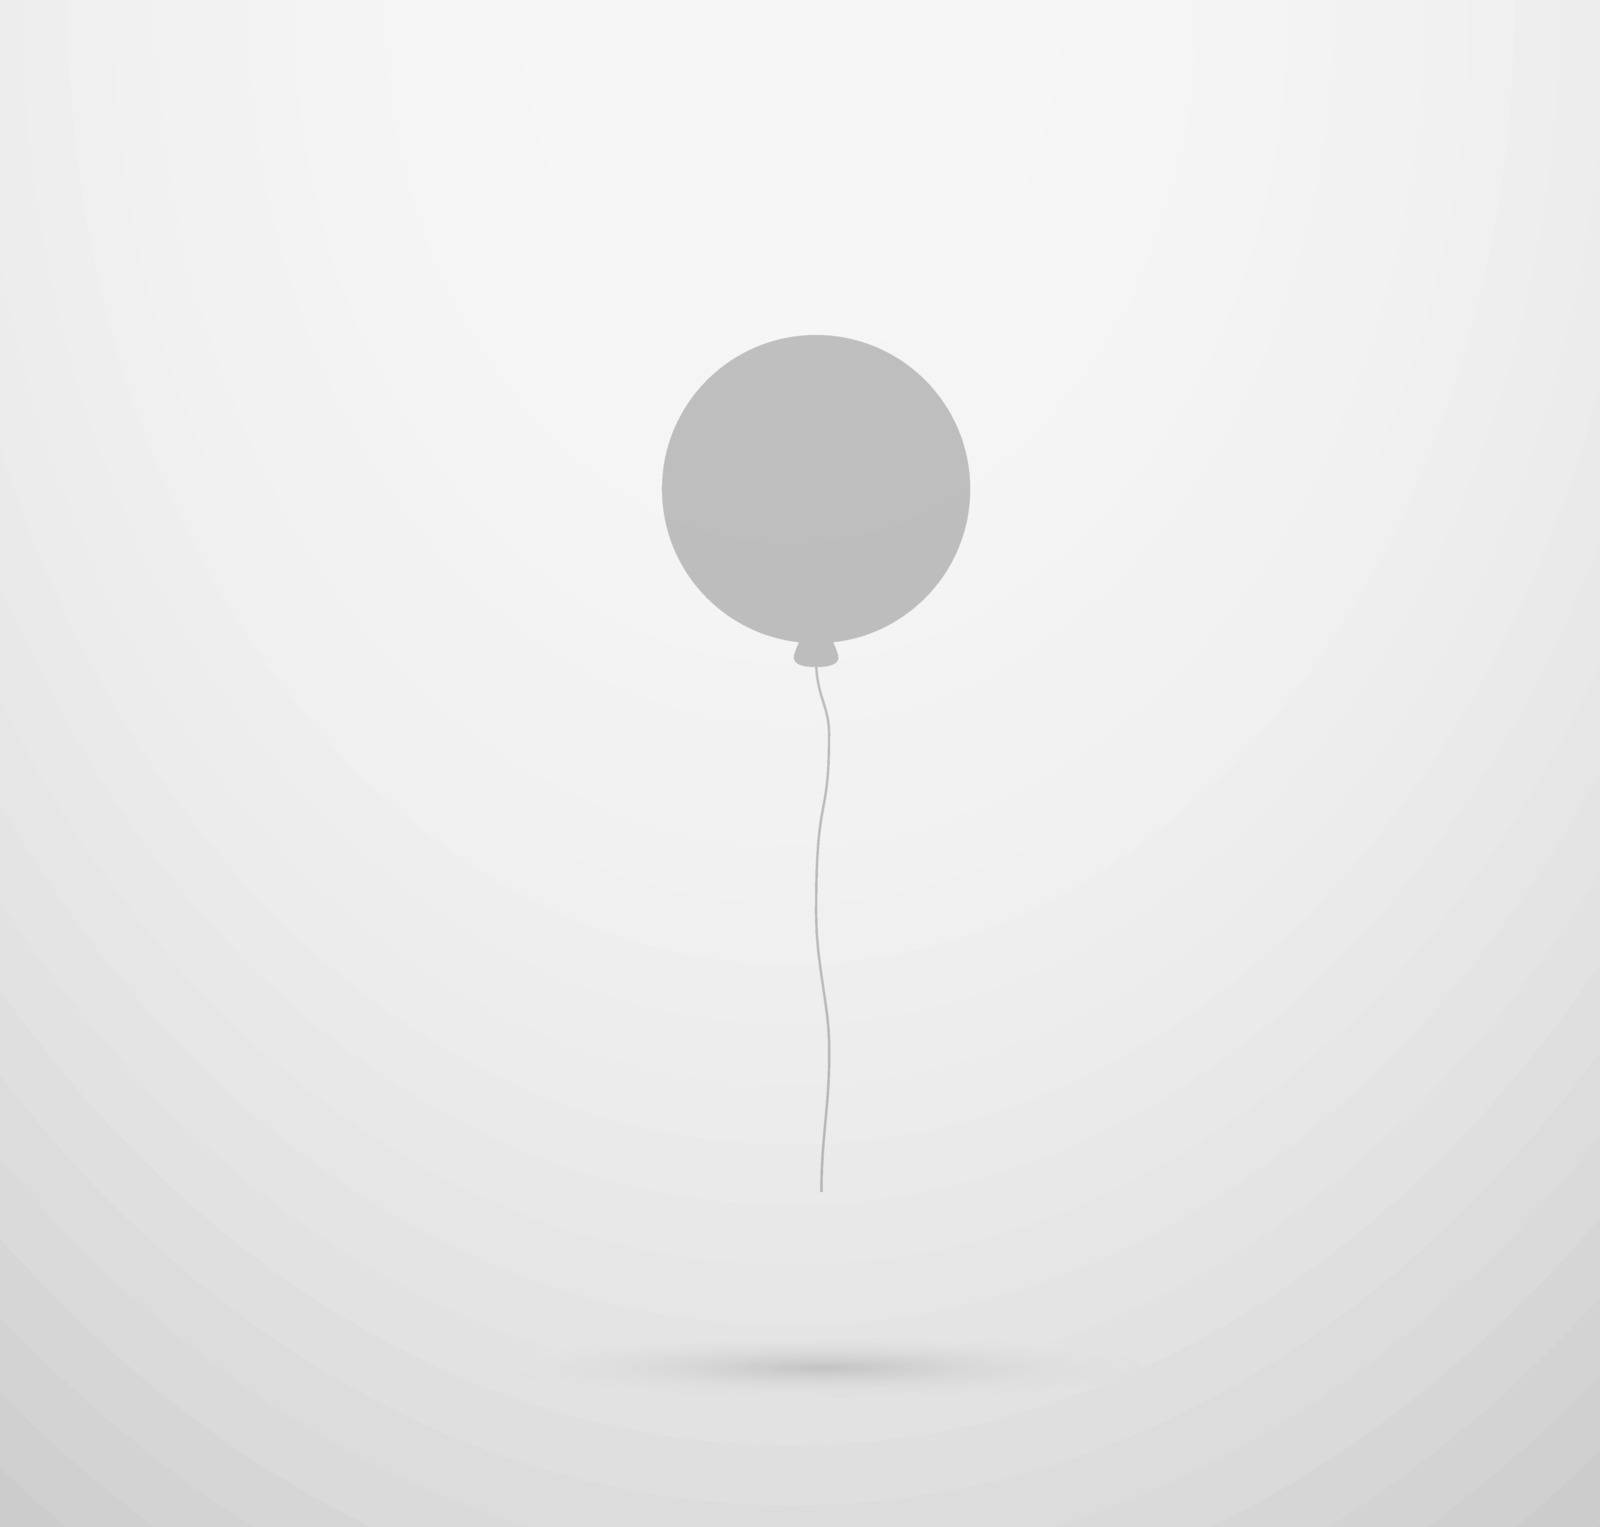 gray silhouette of the circle balloon on gray gradient background